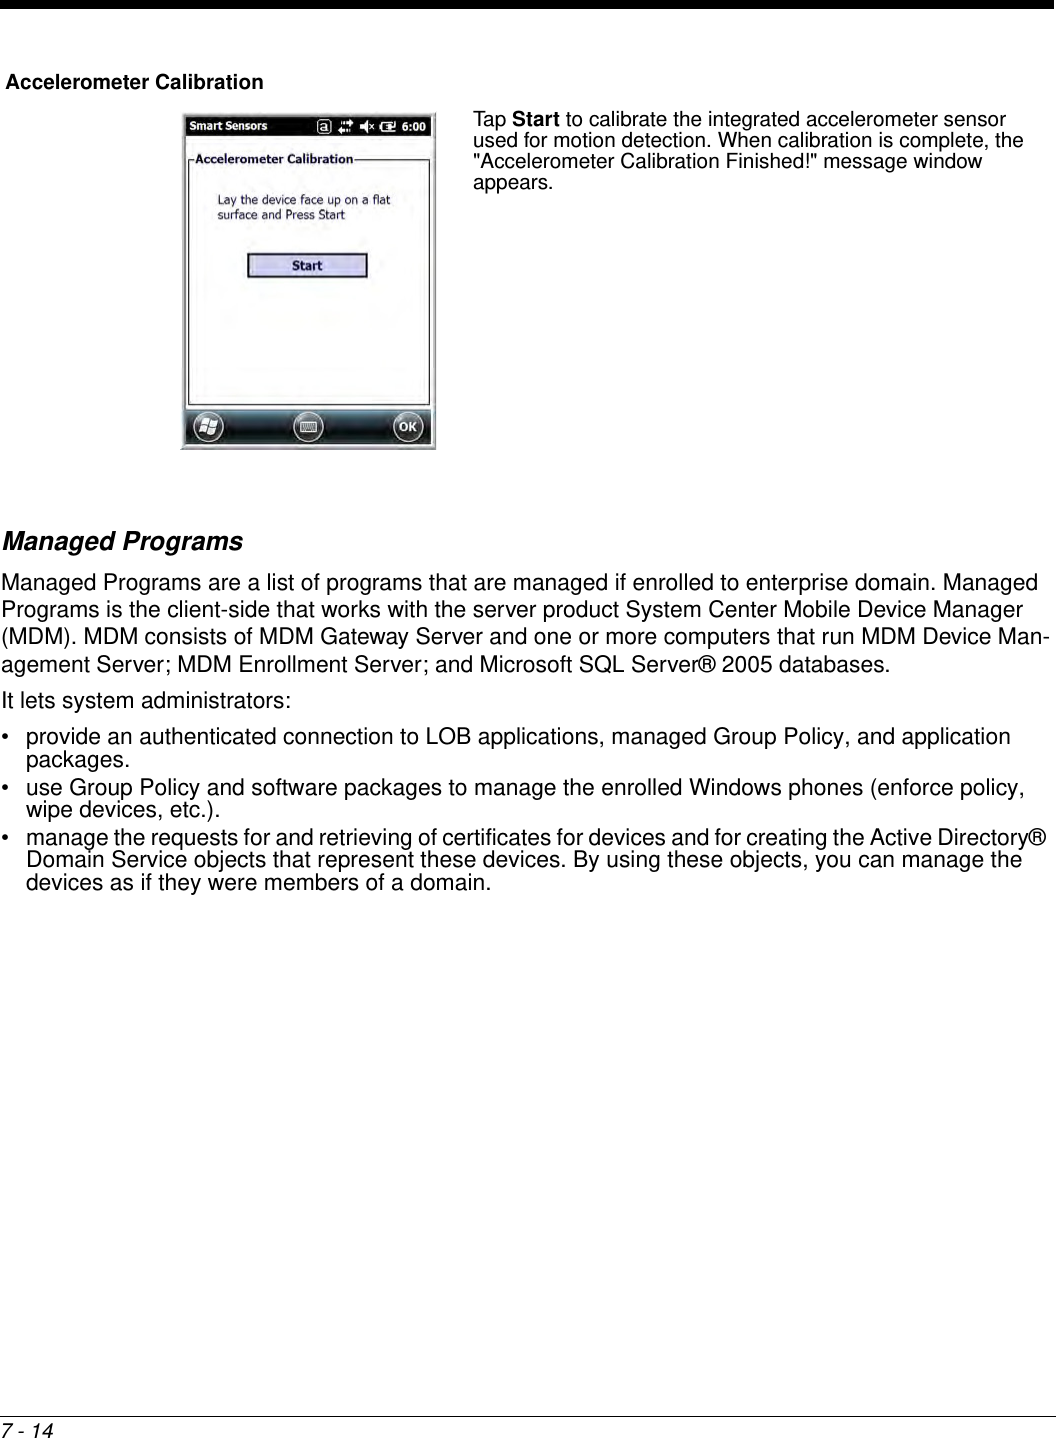 7 - 14Managed ProgramsManaged Programs are a list of programs that are managed if enrolled to enterprise domain. Managed Programs is the client-side that works with the server product System Center Mobile Device Manager (MDM). MDM consists of MDM Gateway Server and one or more computers that run MDM Device Man-agement Server; MDM Enrollment Server; and Microsoft SQL Server® 2005 databases. It lets system administrators:• provide an authenticated connection to LOB applications, managed Group Policy, and application packages.• use Group Policy and software packages to manage the enrolled Windows phones (enforce policy, wipe devices, etc.). • manage the requests for and retrieving of certificates for devices and for creating the Active Directory® Domain Service objects that represent these devices. By using these objects, you can manage the devices as if they were members of a domain.Accelerometer CalibrationTap Start to calibrate the integrated accelerometer sensor used for motion detection. When calibration is complete, the &quot;Accelerometer Calibration Finished!&quot; message window appears.